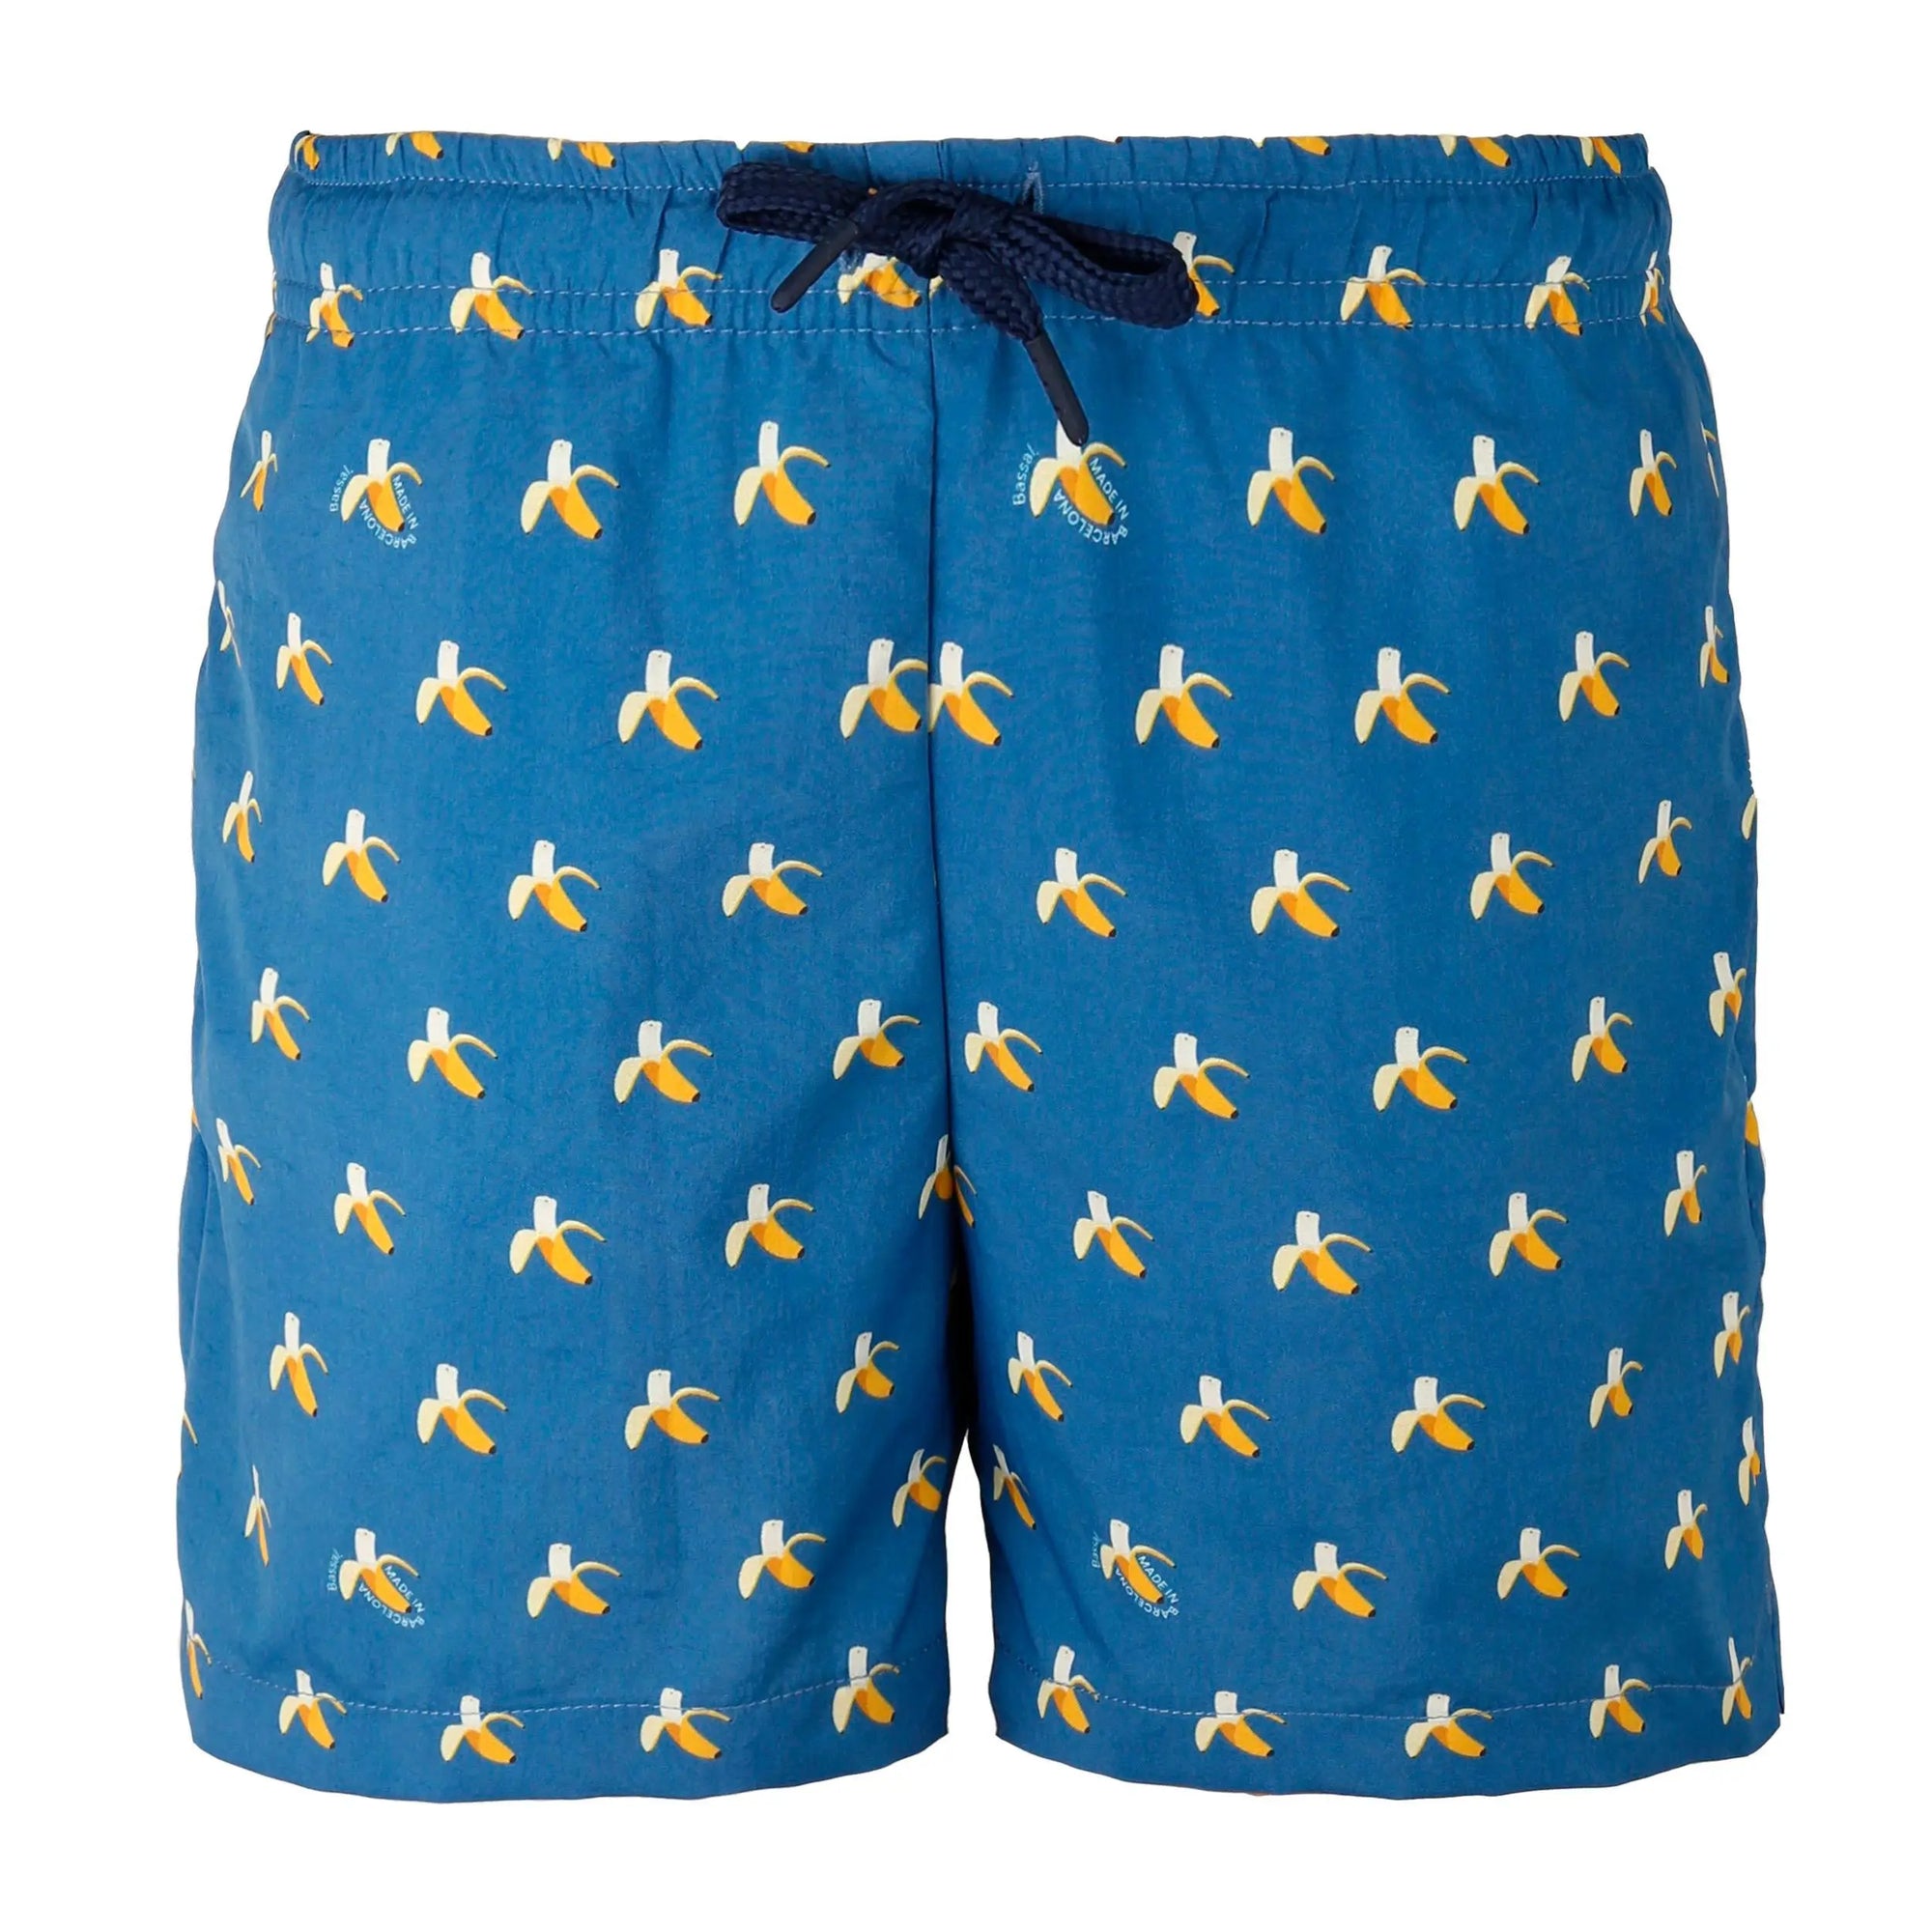 A pair of blue Bananas Kids Swimwear with a yellow and white banana print is neatly displayed in an orange-lined gift box. The swimwear has a navy blue drawstring and is tagged with a Bassal. kids label. The box lid features the brand name "Bassal" from bassalstore, your go-to store for fun fashion.
